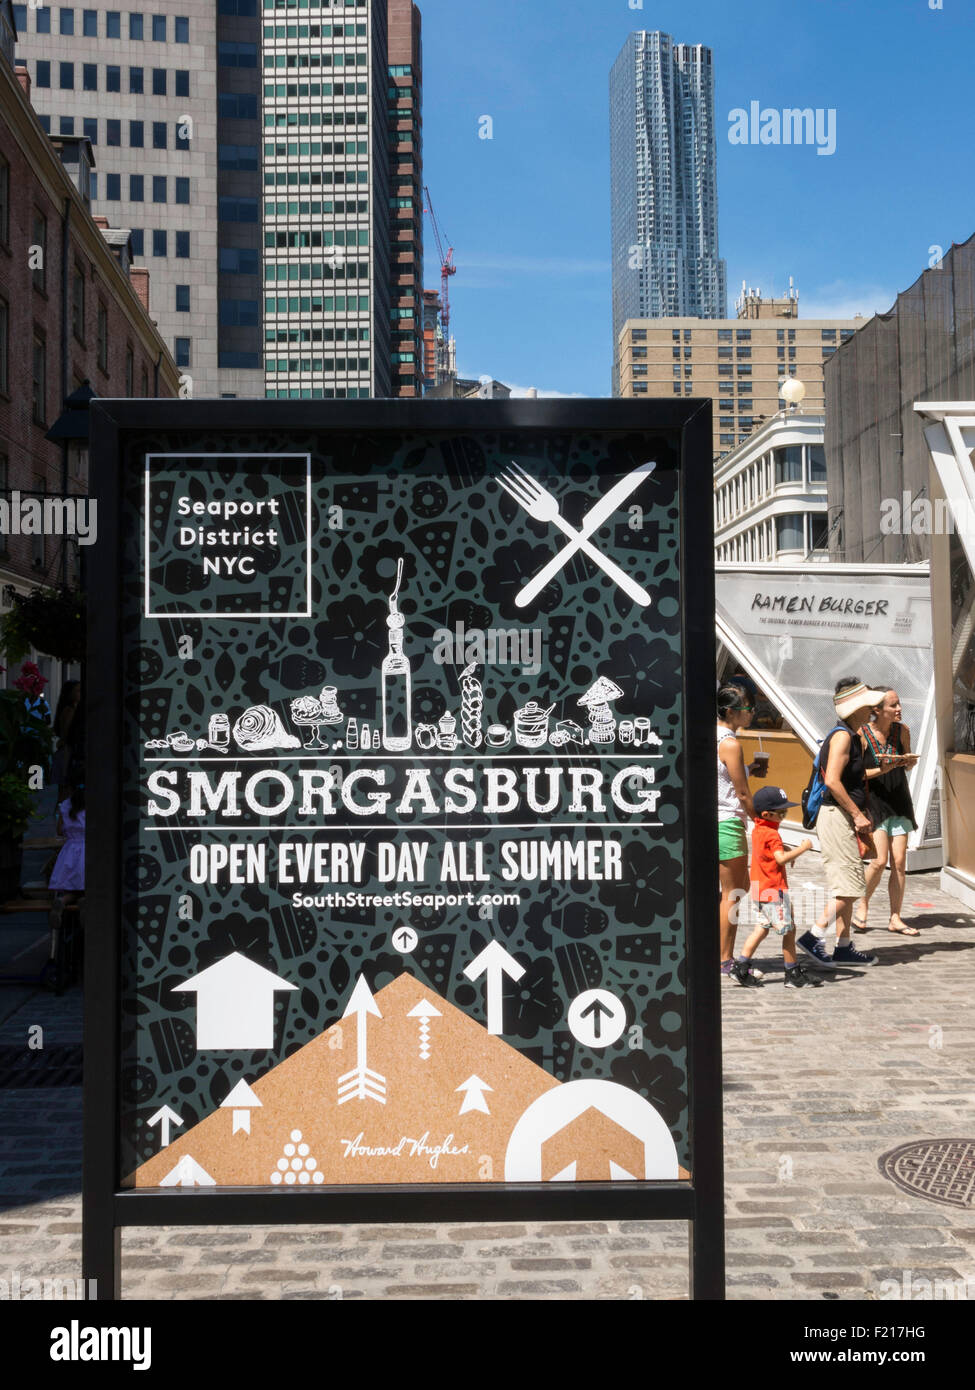 Smorgasburg Outdoor Food Court, South Street Seaport Historic District, NYC Banque D'Images